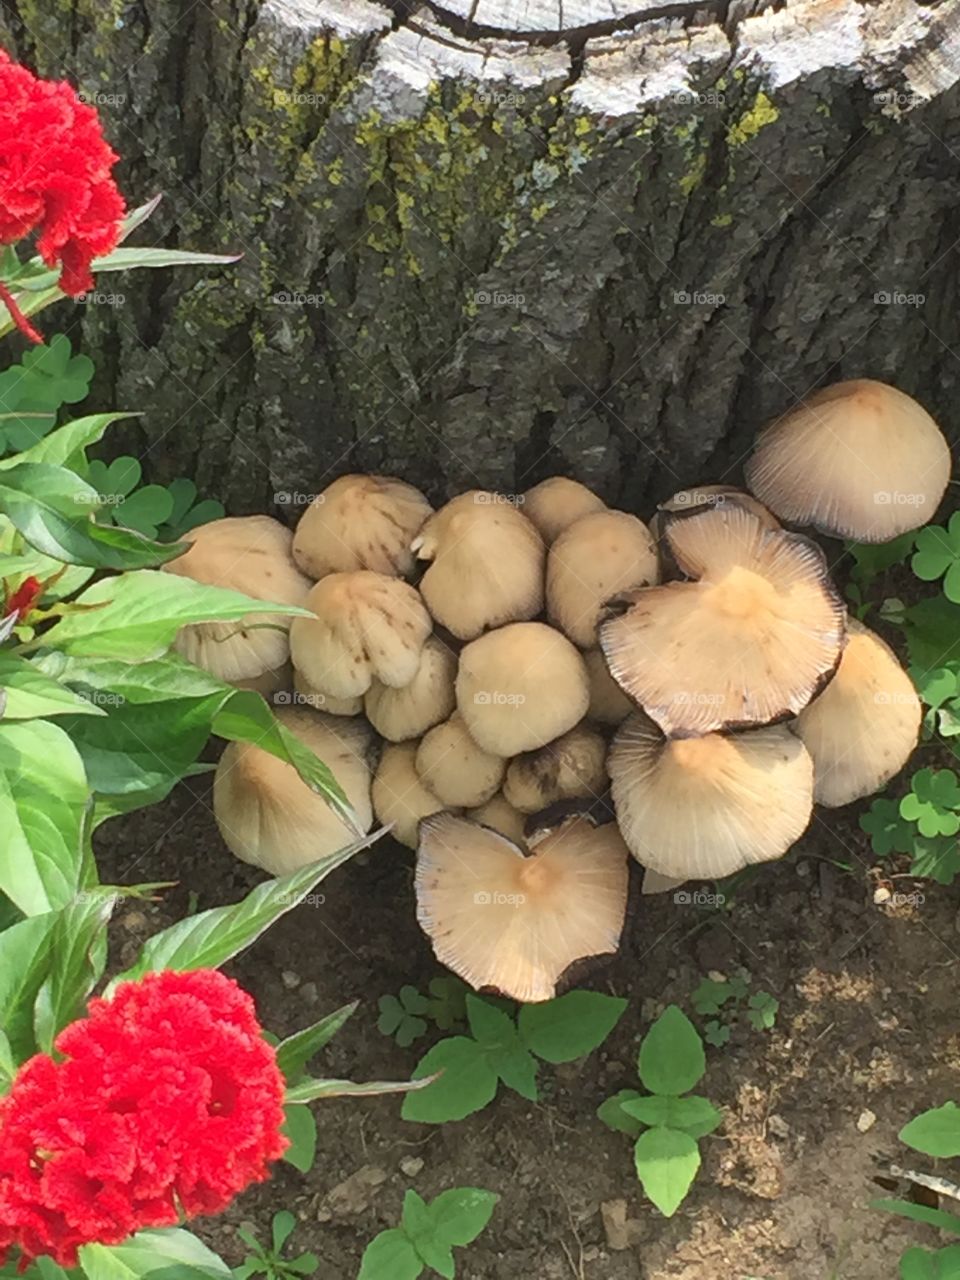 Mushrooms In Queens Village. Walking through my NY neighborhood yesterday and captured this site!